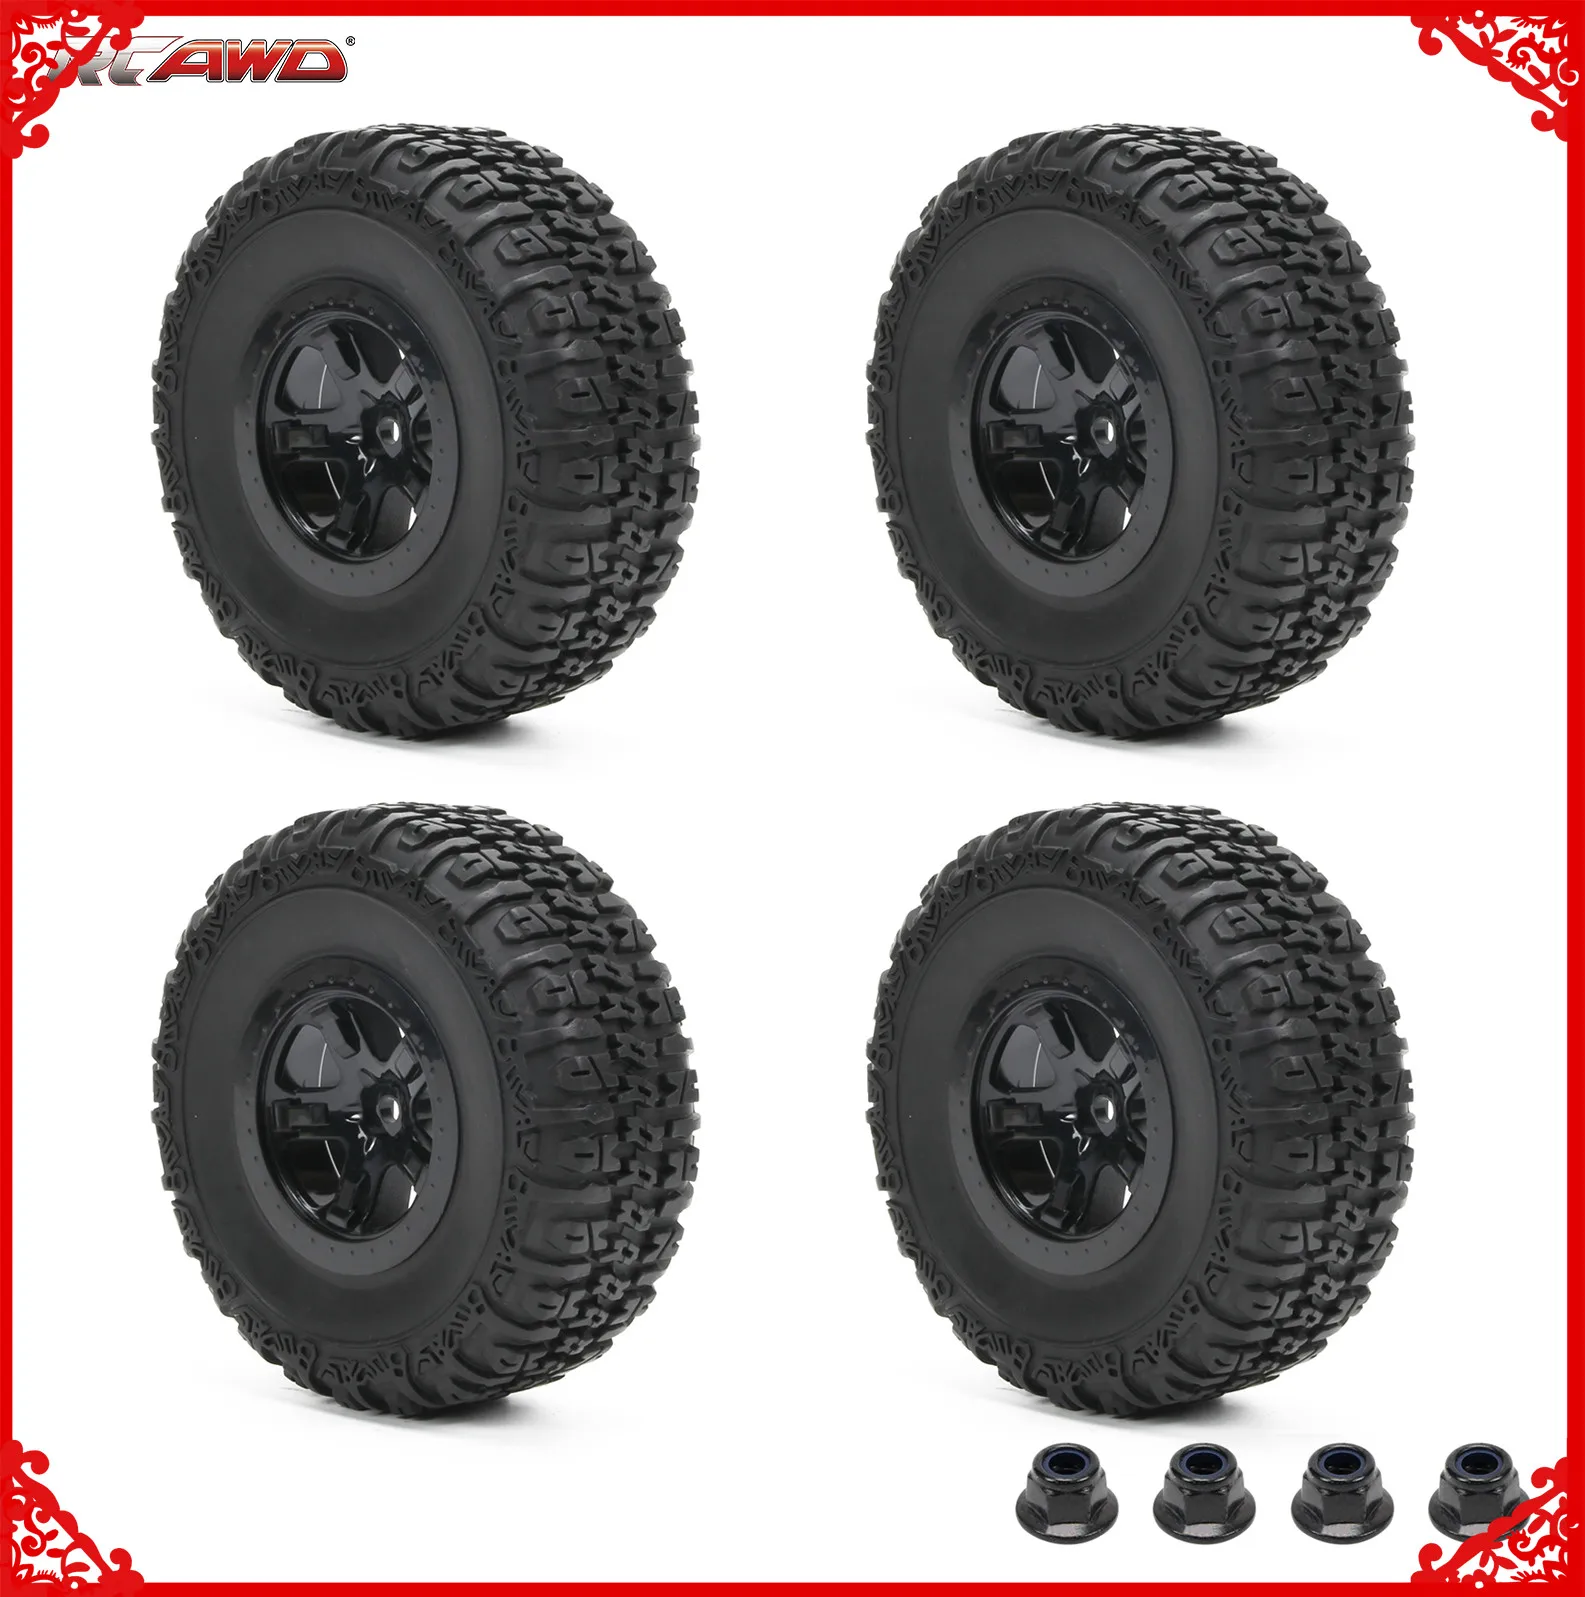 

RCAWD Front/Rear 2.2/3.0 Pre-Mounted Tires wheel rim for 1/10 LOSI Baja Rey 4WD 1/10 Hammer Rey U4 Rock Racer Upgrades parts